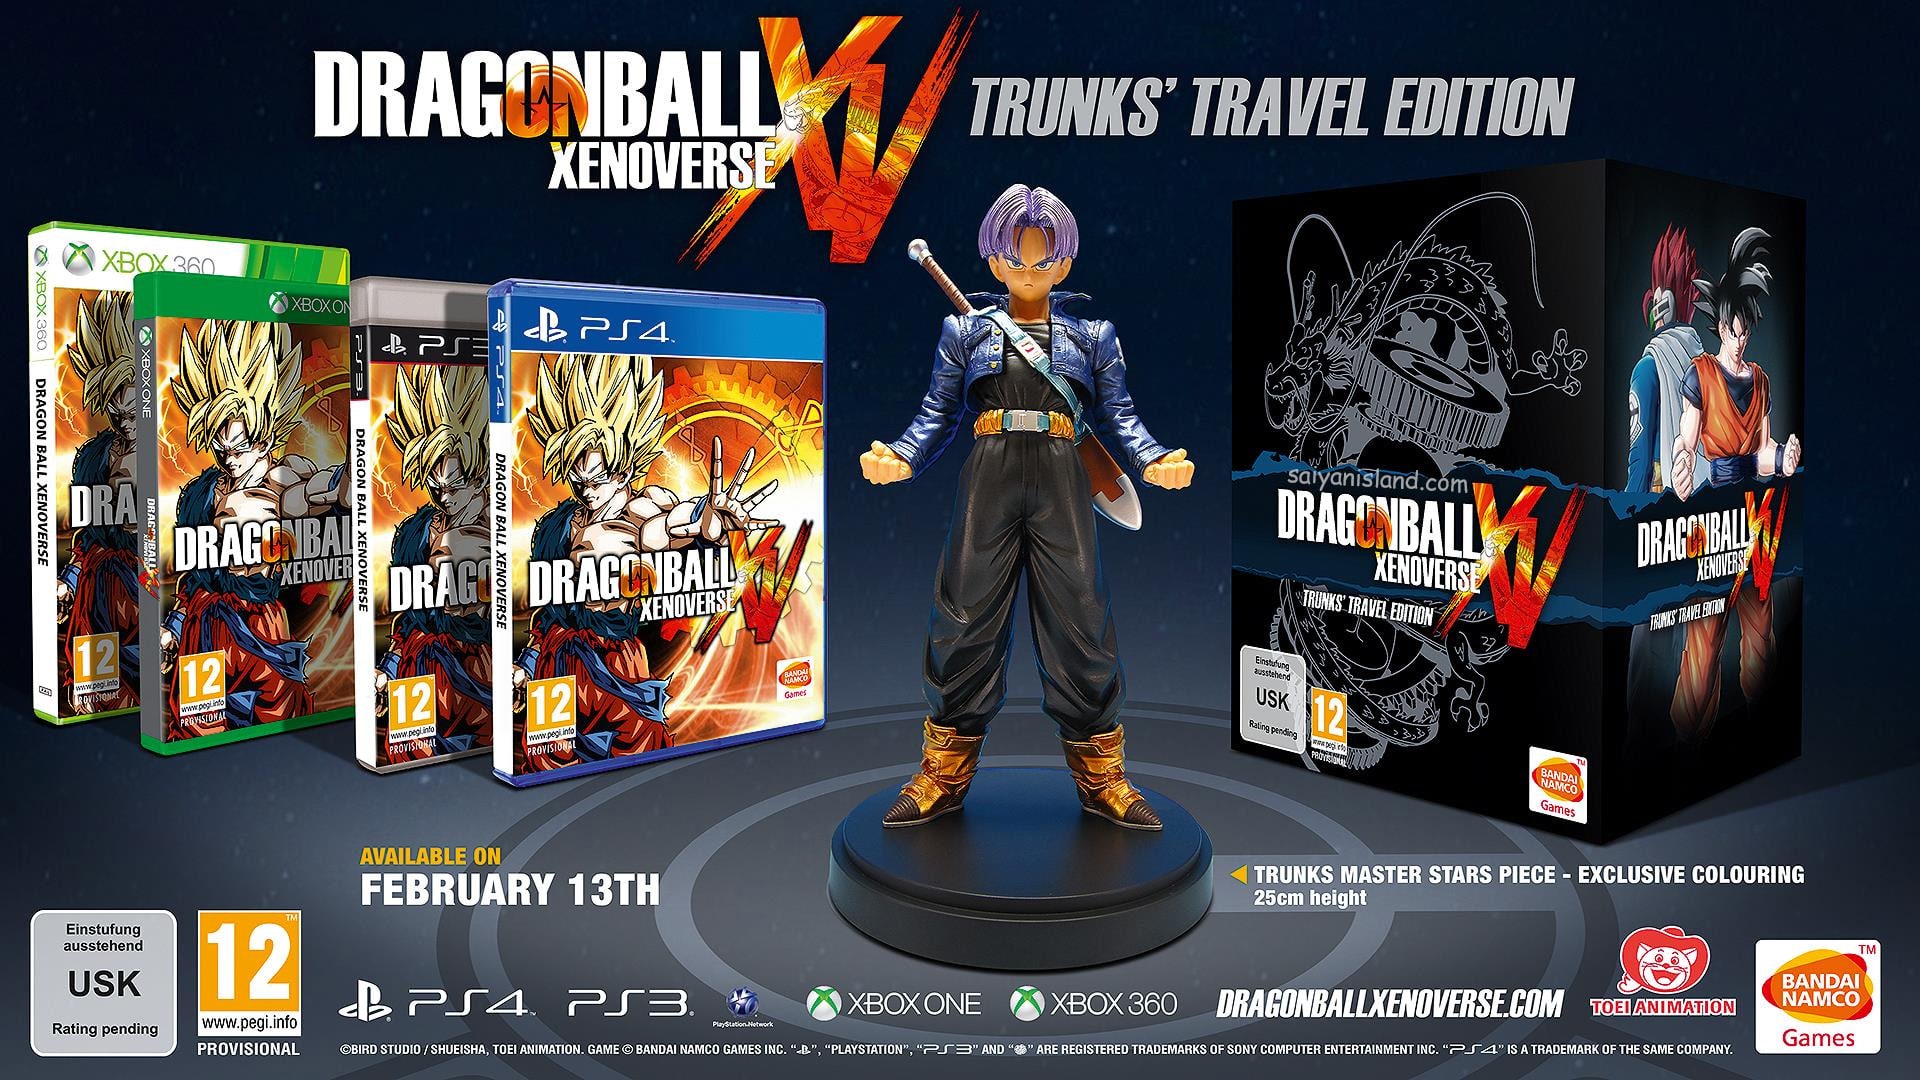 Dragon Ball Xenoverse Collector's Edition Trunks Travel Figurine Packaging